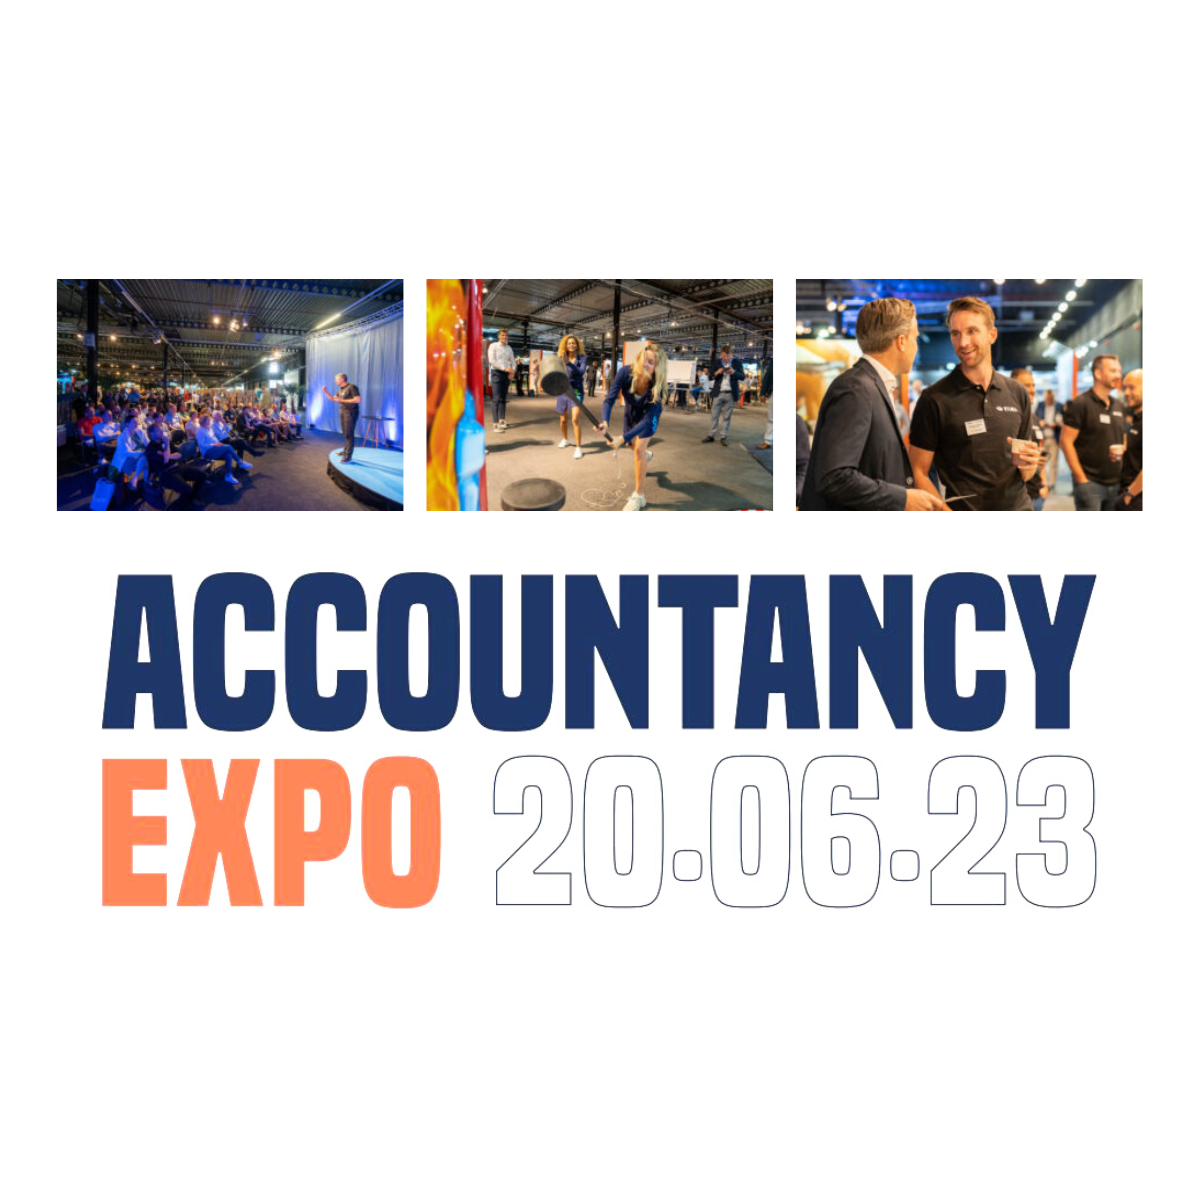 Save the date: Accountancy Expo 20 juni 2023